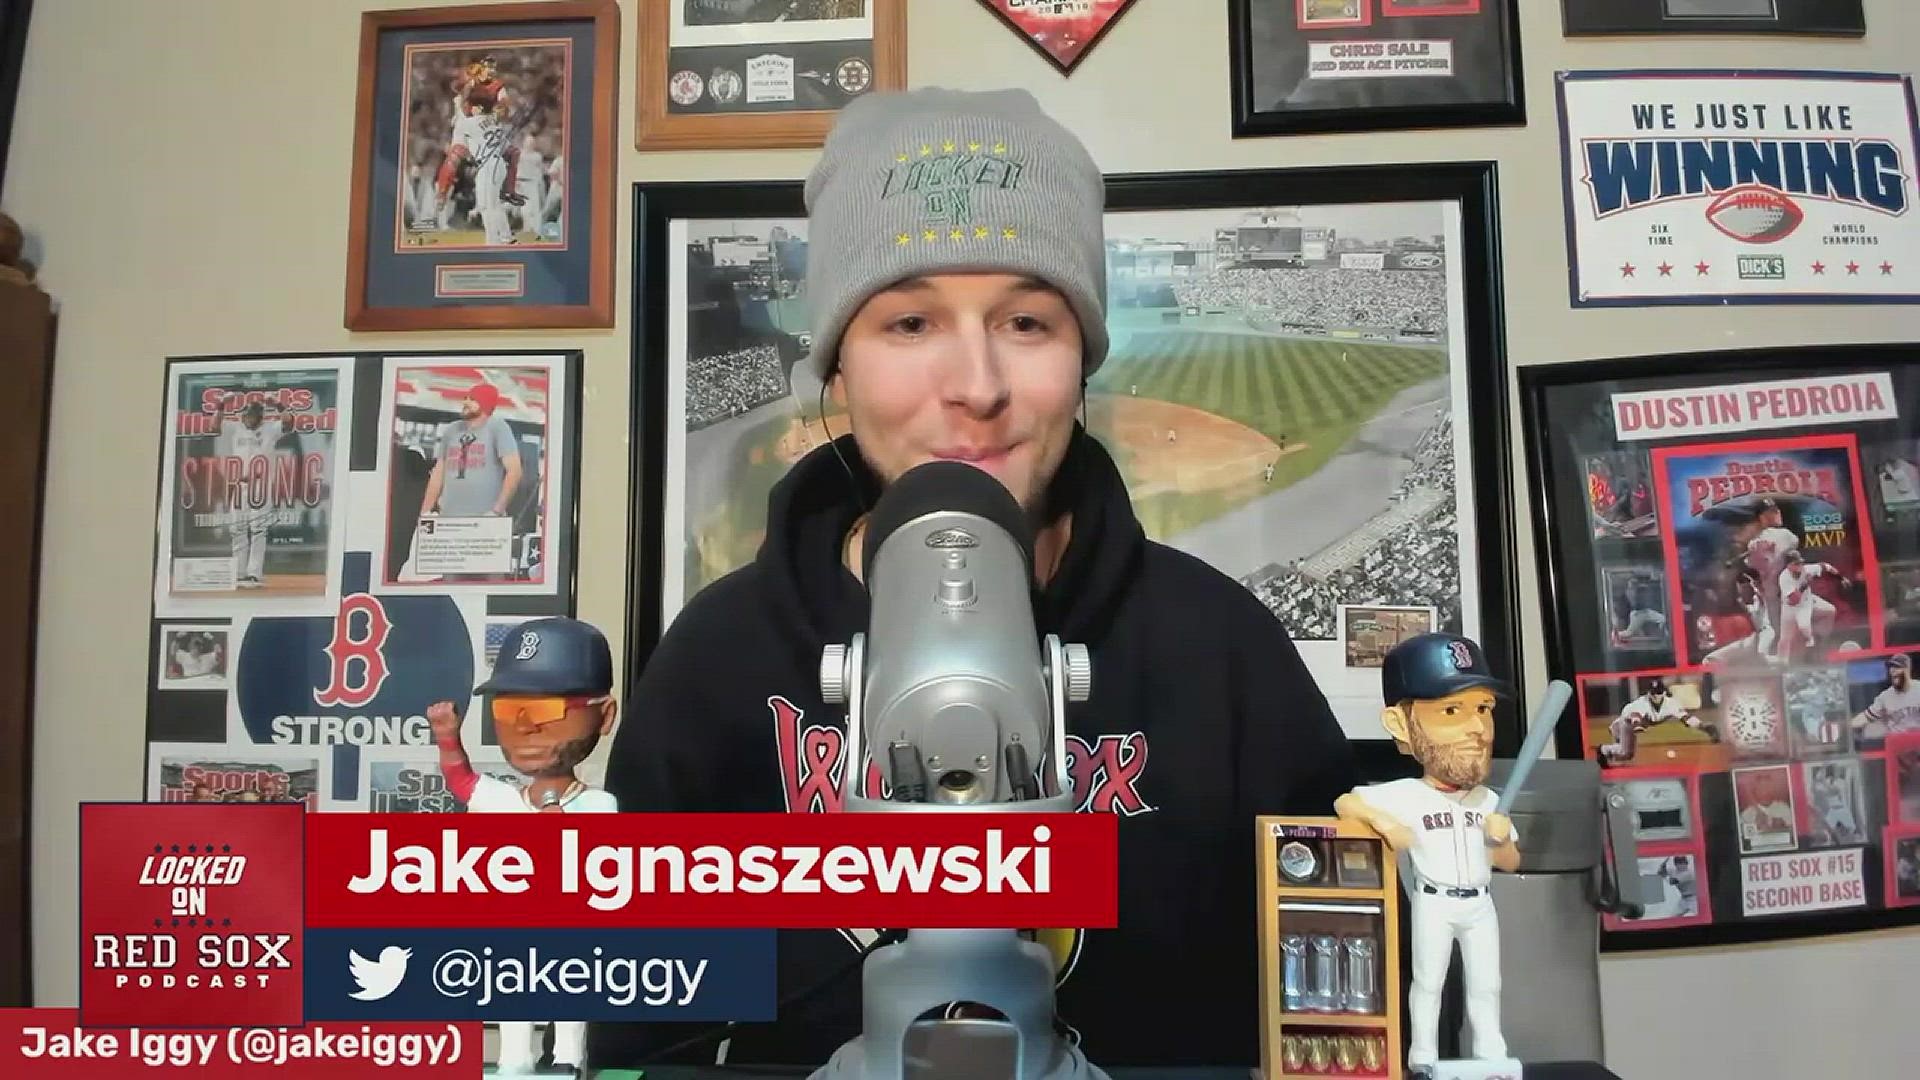 With many Red Sox players rocking the stache this offseason, Jake Ignaszewski brings up the idea of making the 2023 theme "Fear the Stache".